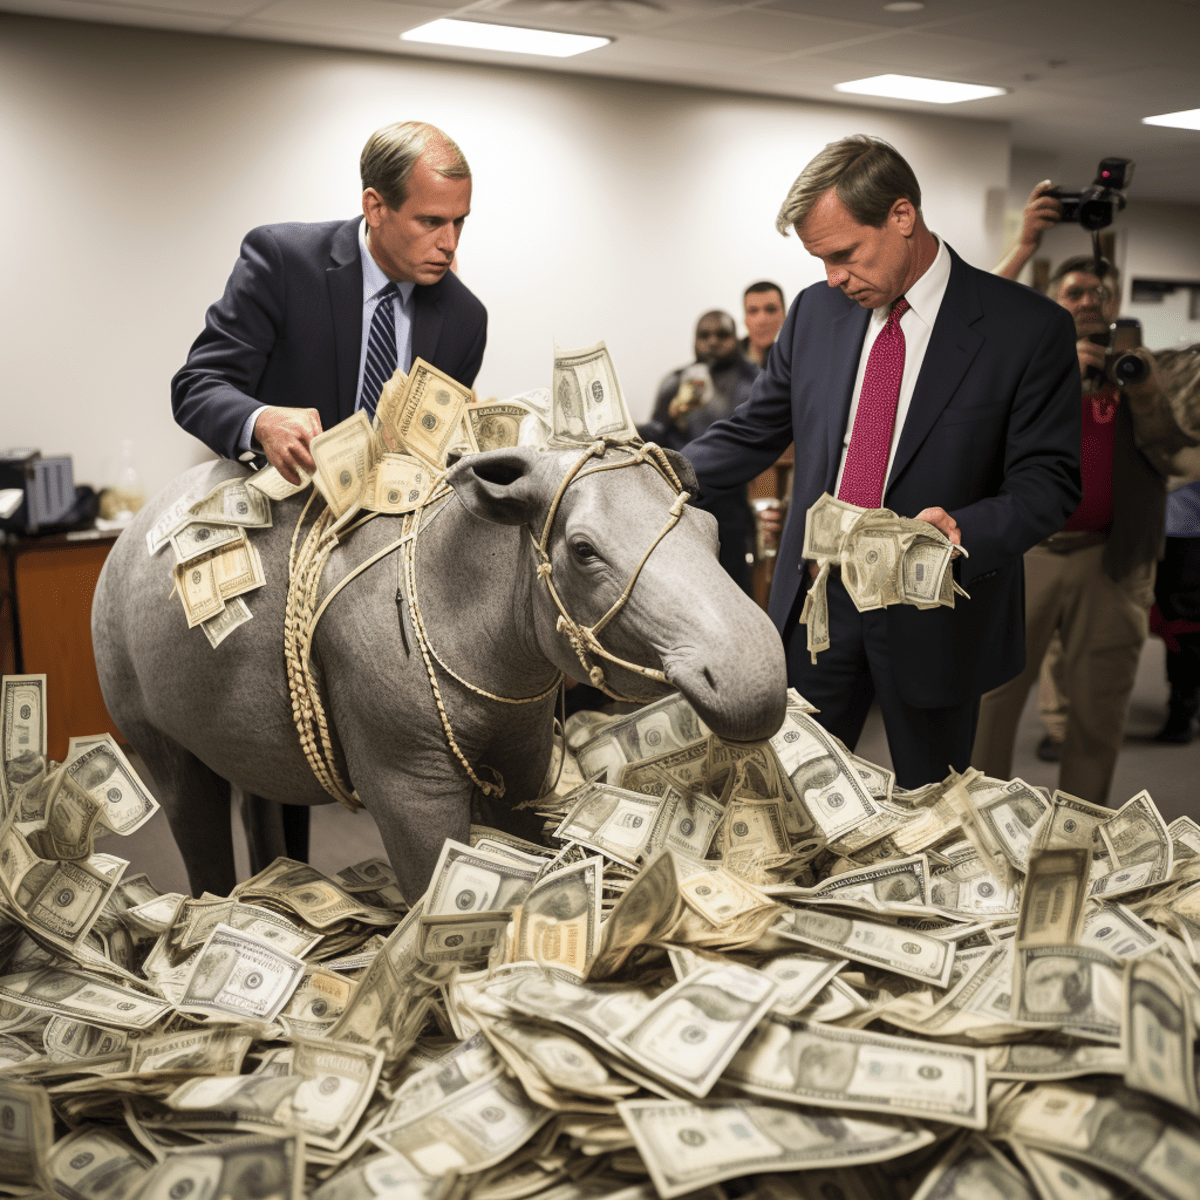 When Elephants and Donkeys Dance: Beshear, Cameron and The Twisted Waltz of Kentucky Politics